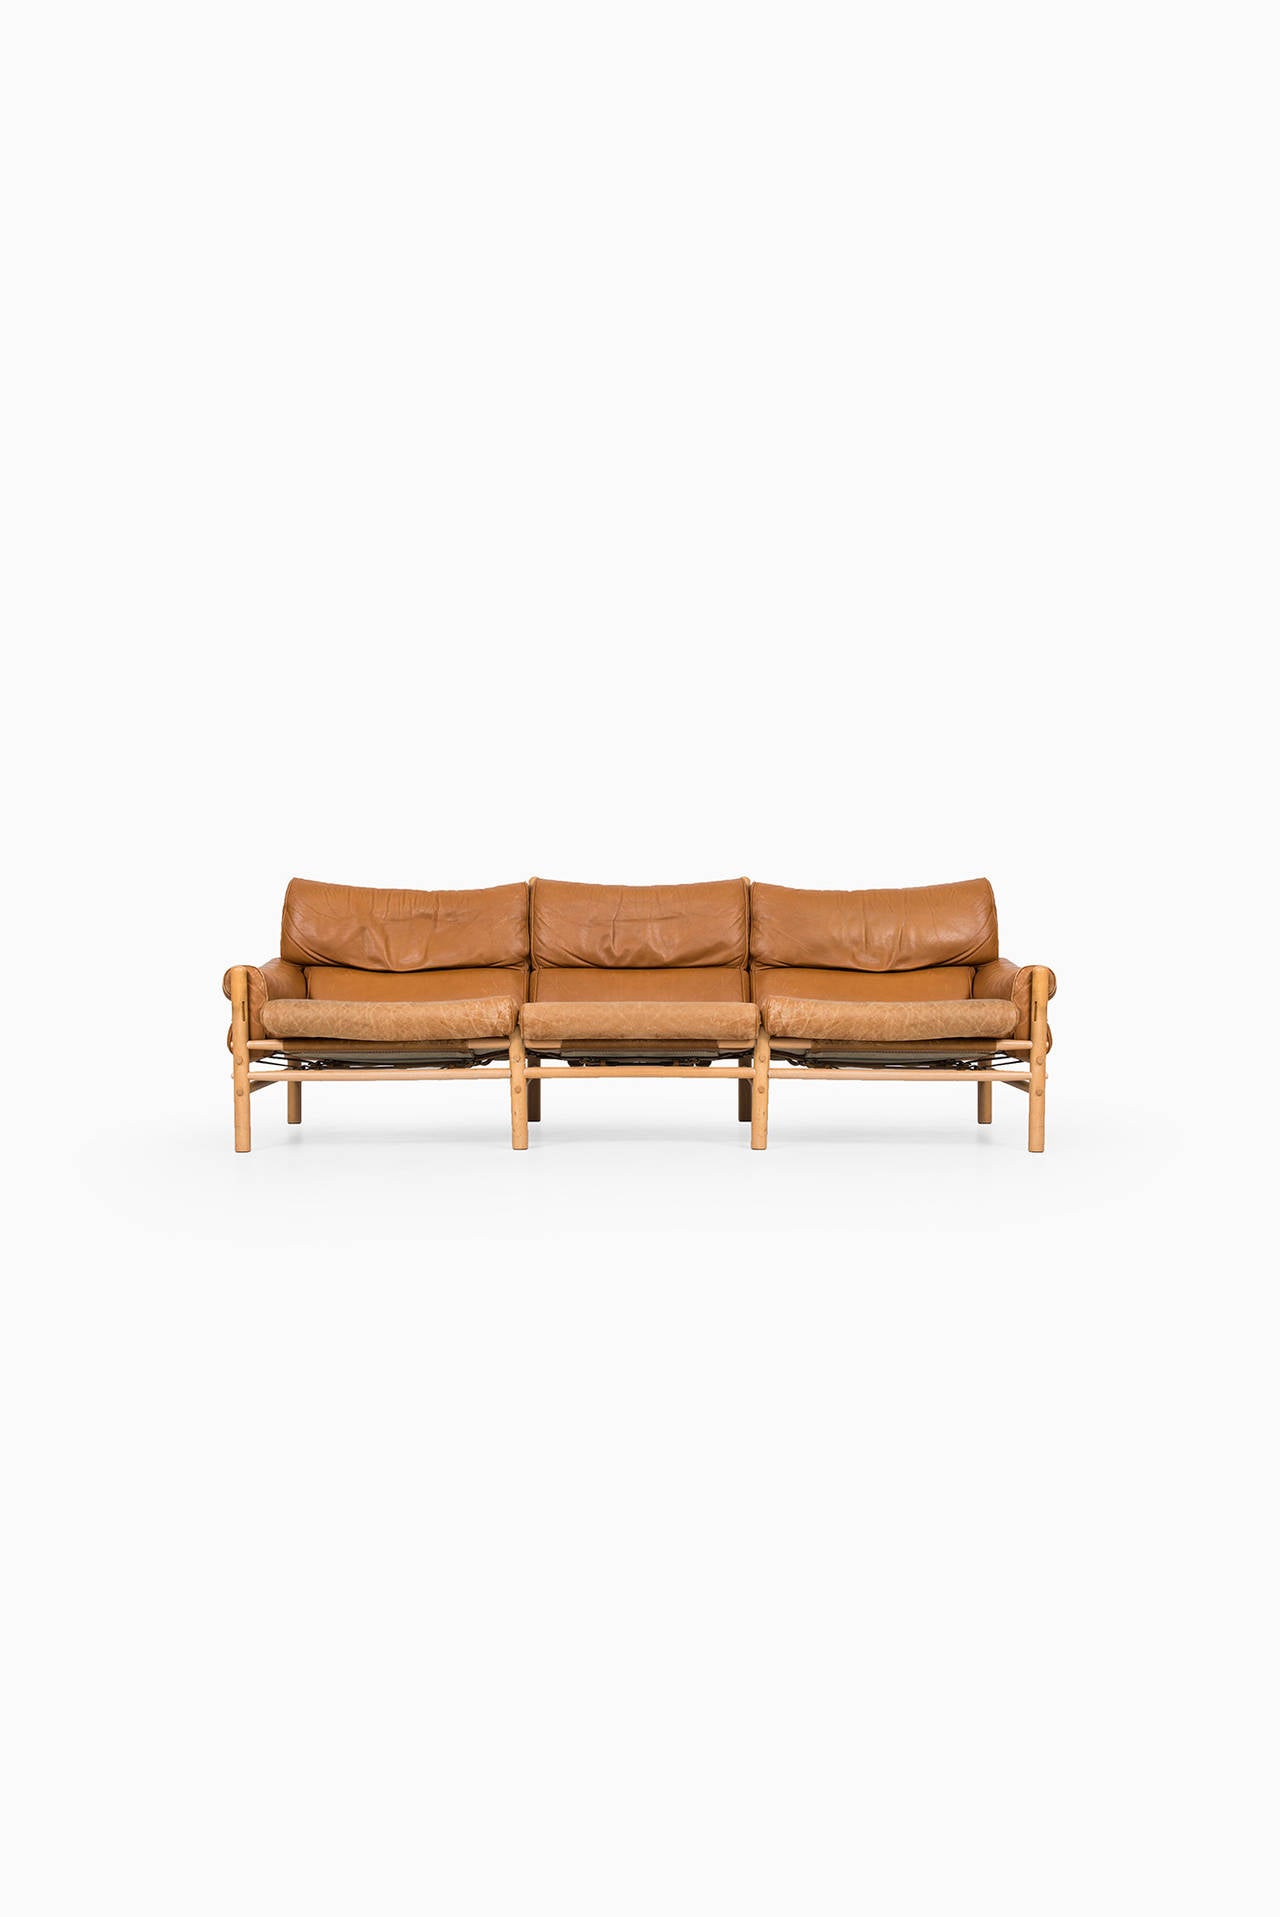 Swedish Arne Norell Kontiki sofa by Arne Norell AB in Aneby, Sweden